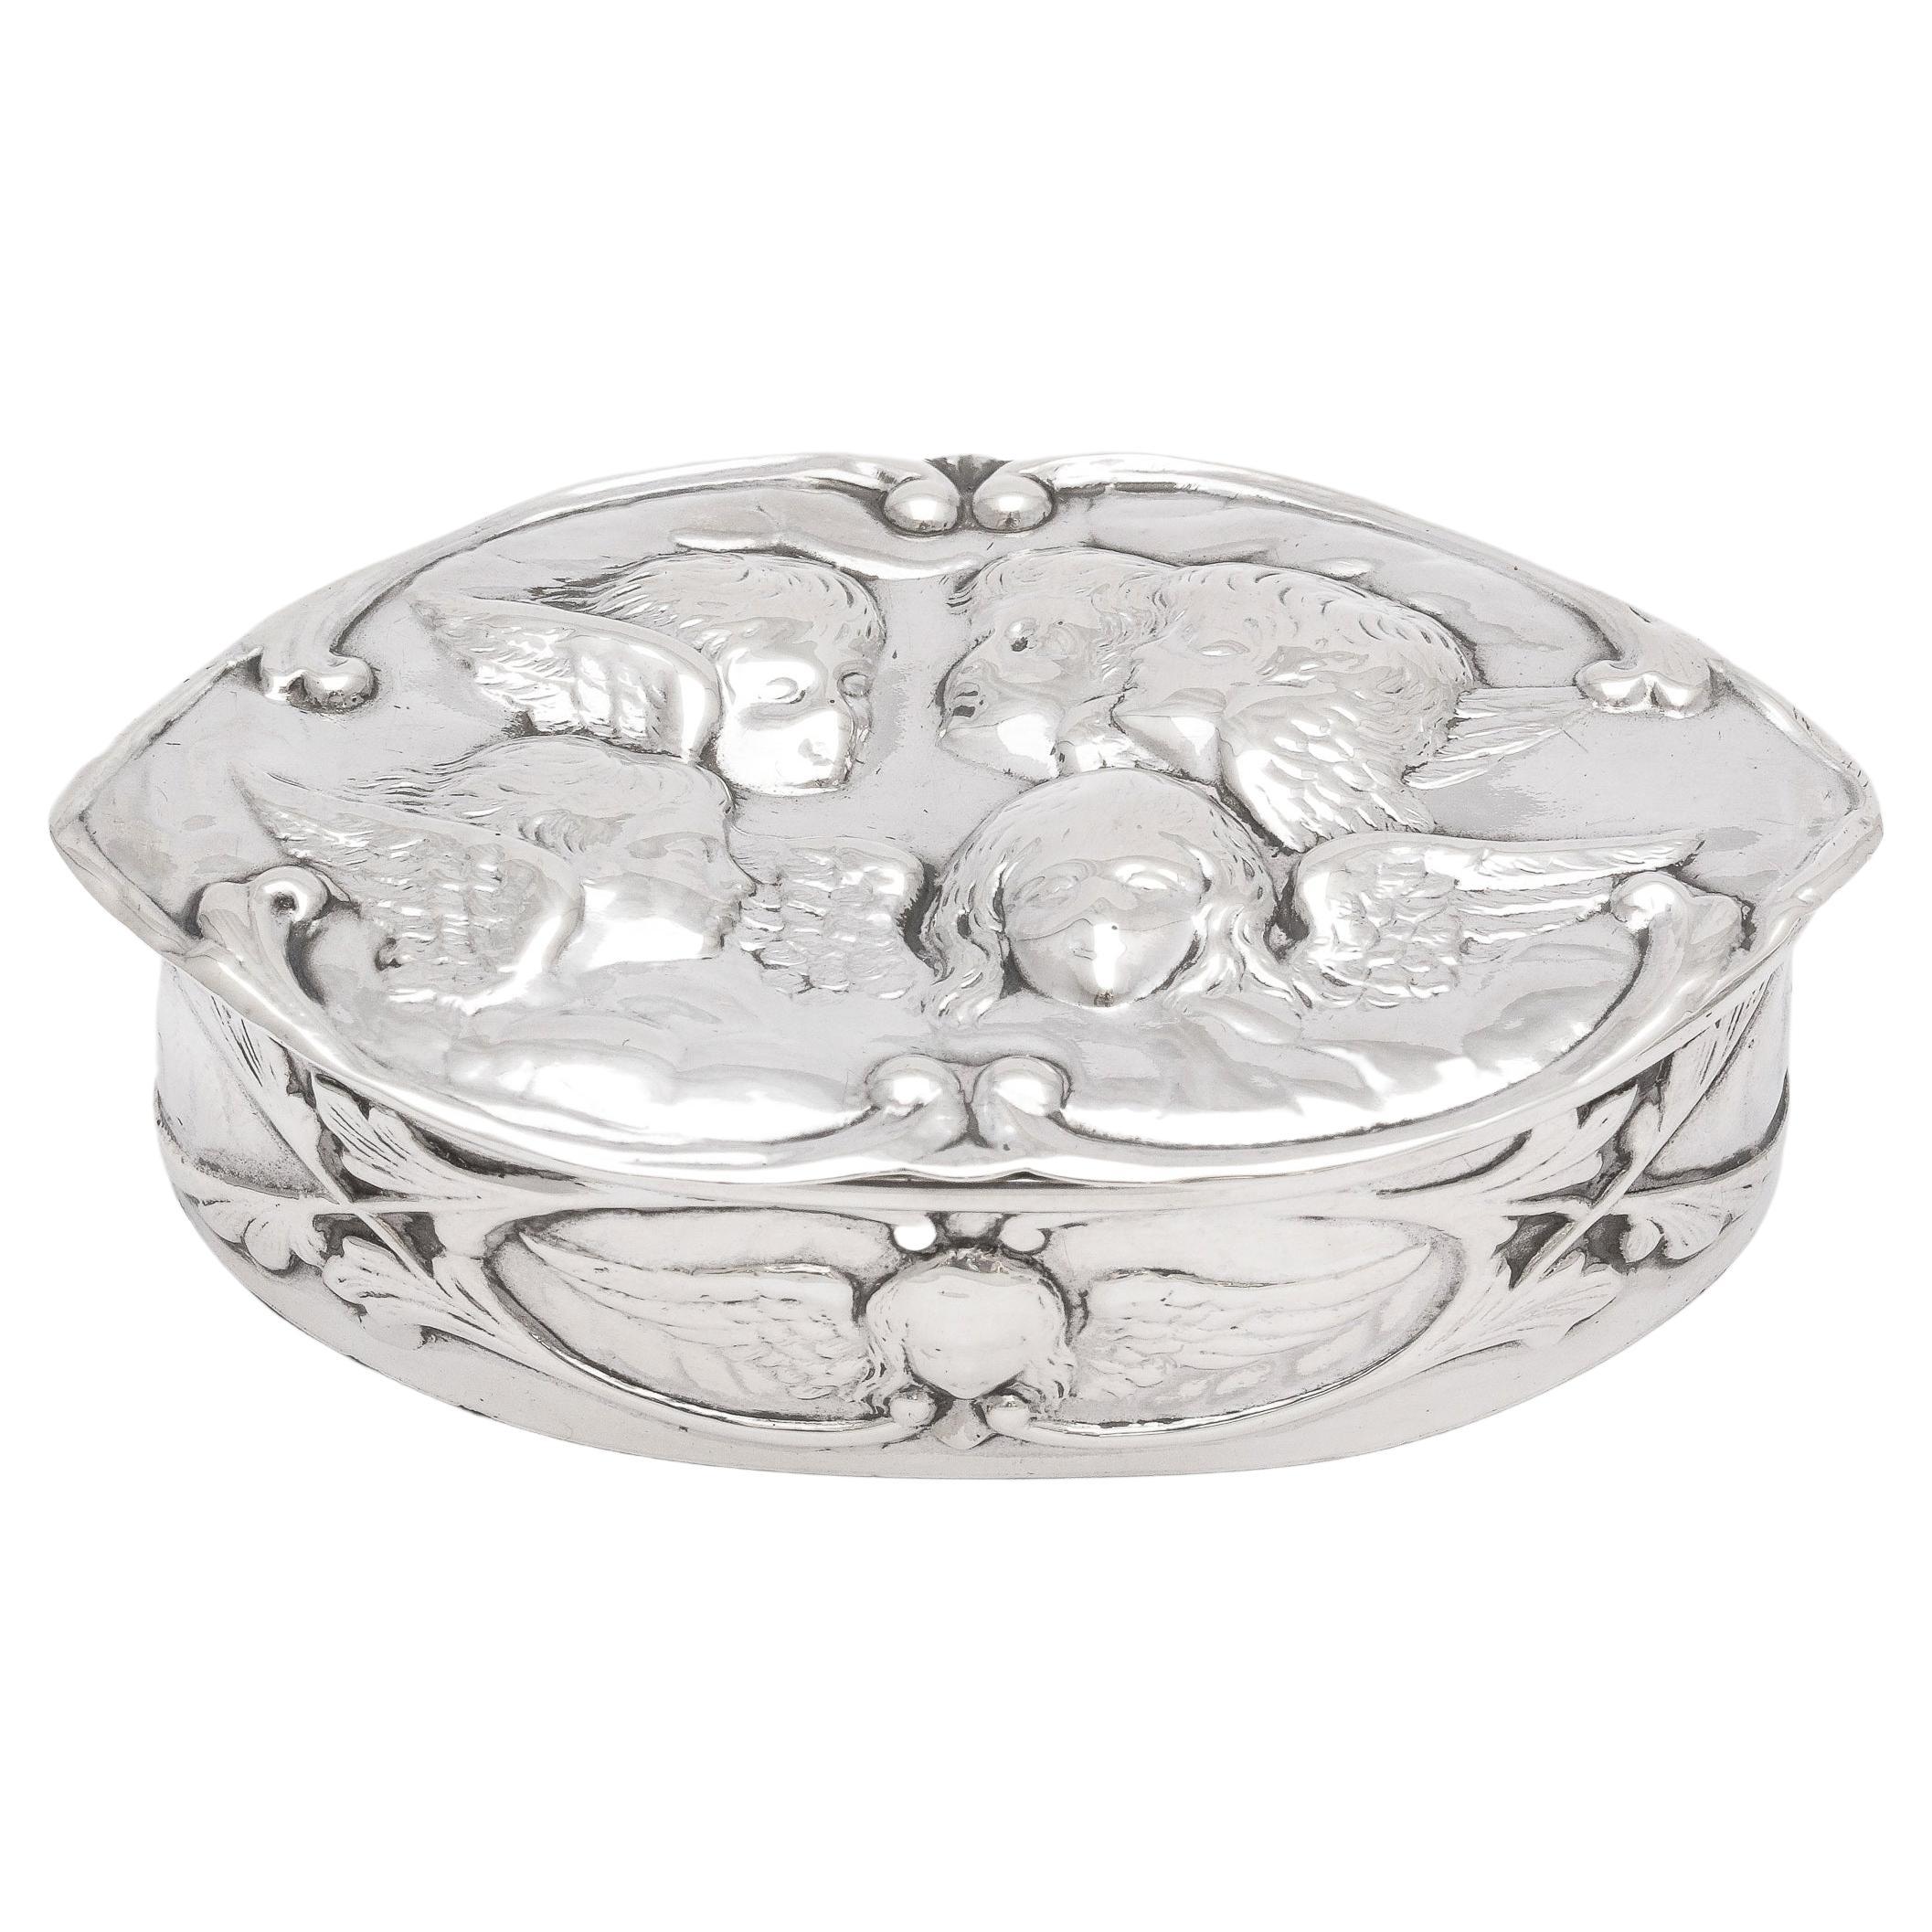 Victorian Period Sterling Silver Trinkets Box With Hinged Lid by William Comyns